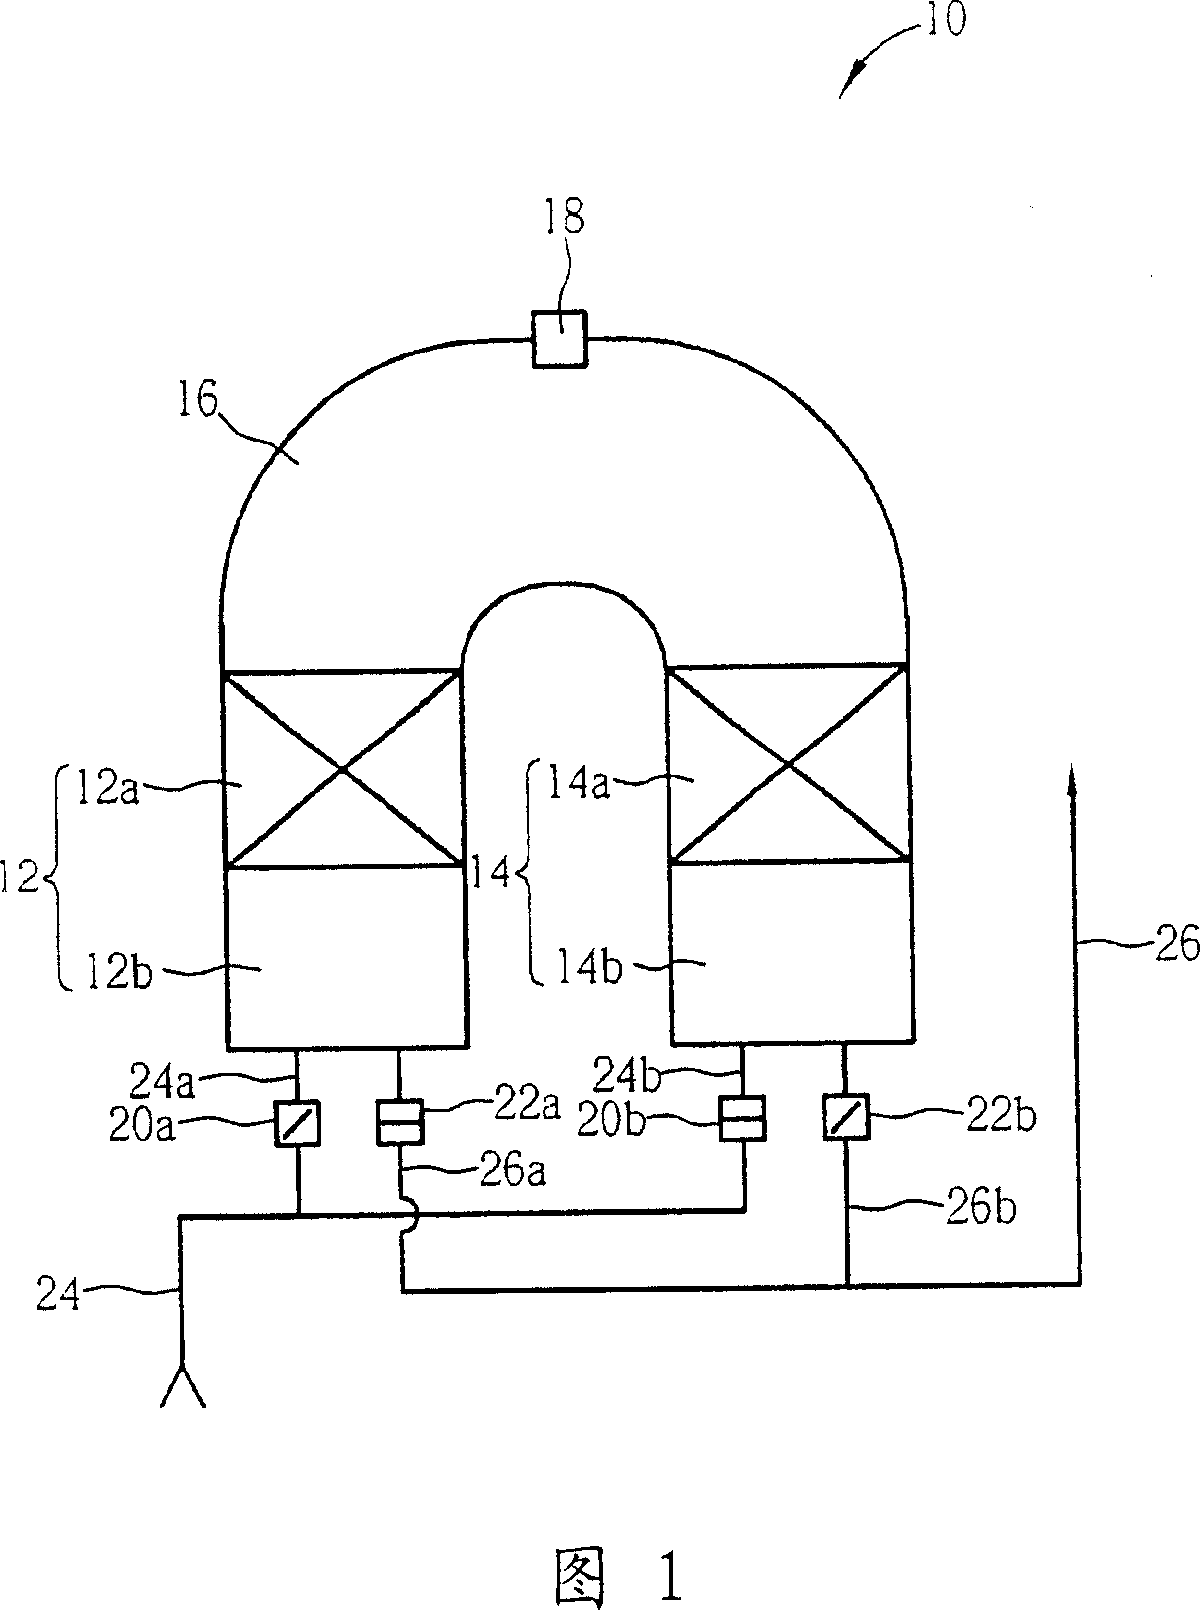 Heat recovery combustion furnace